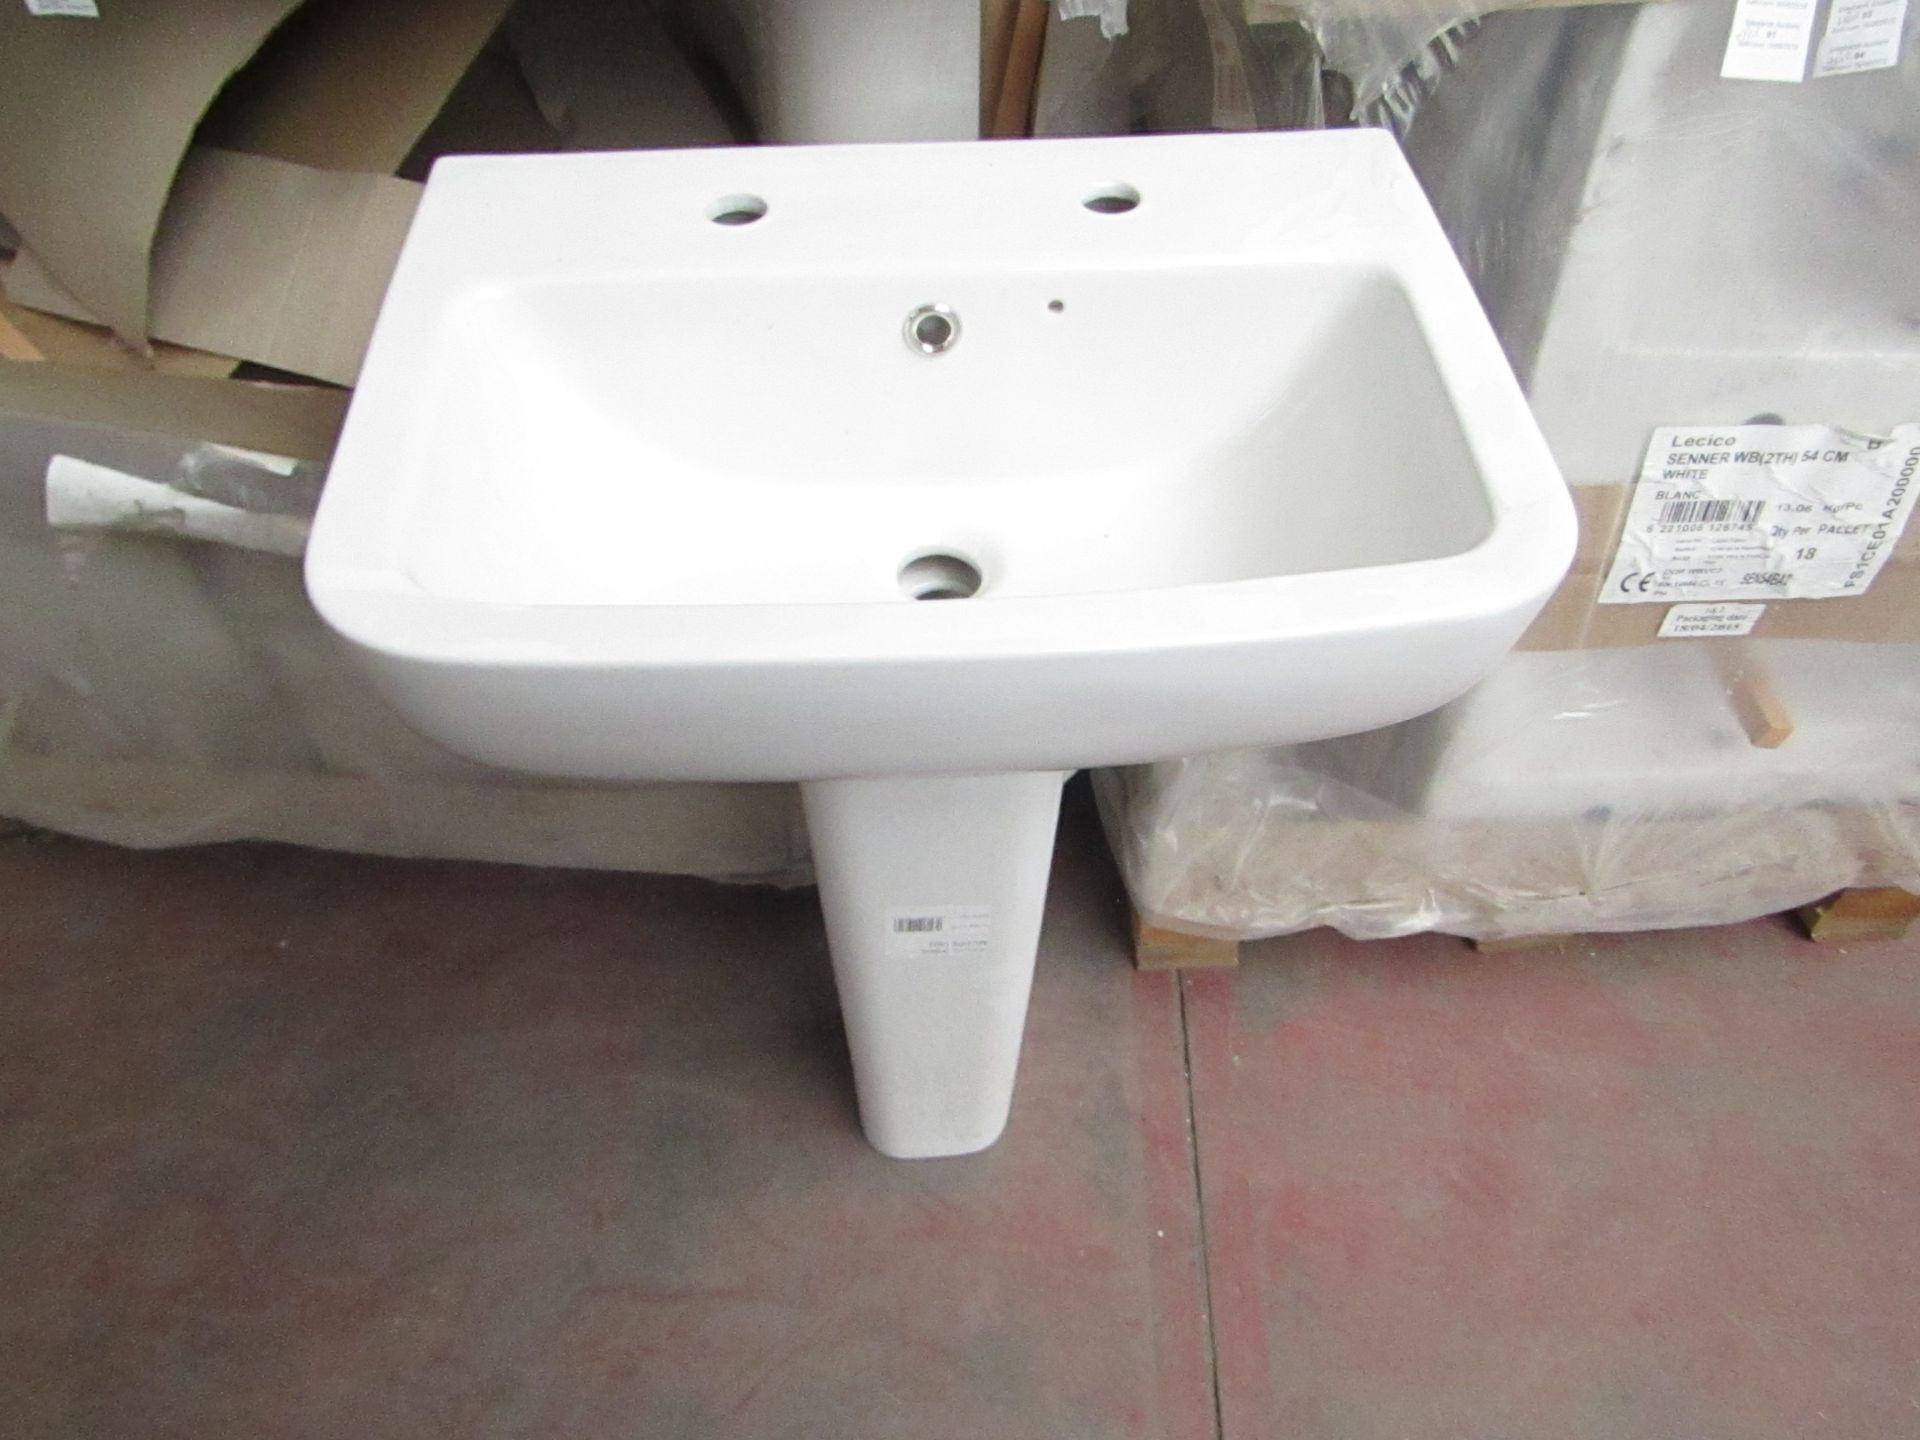 Lecico Senner 2 tap hole basin 60cm with neroli full pedestal that appears to fit the basin, unused